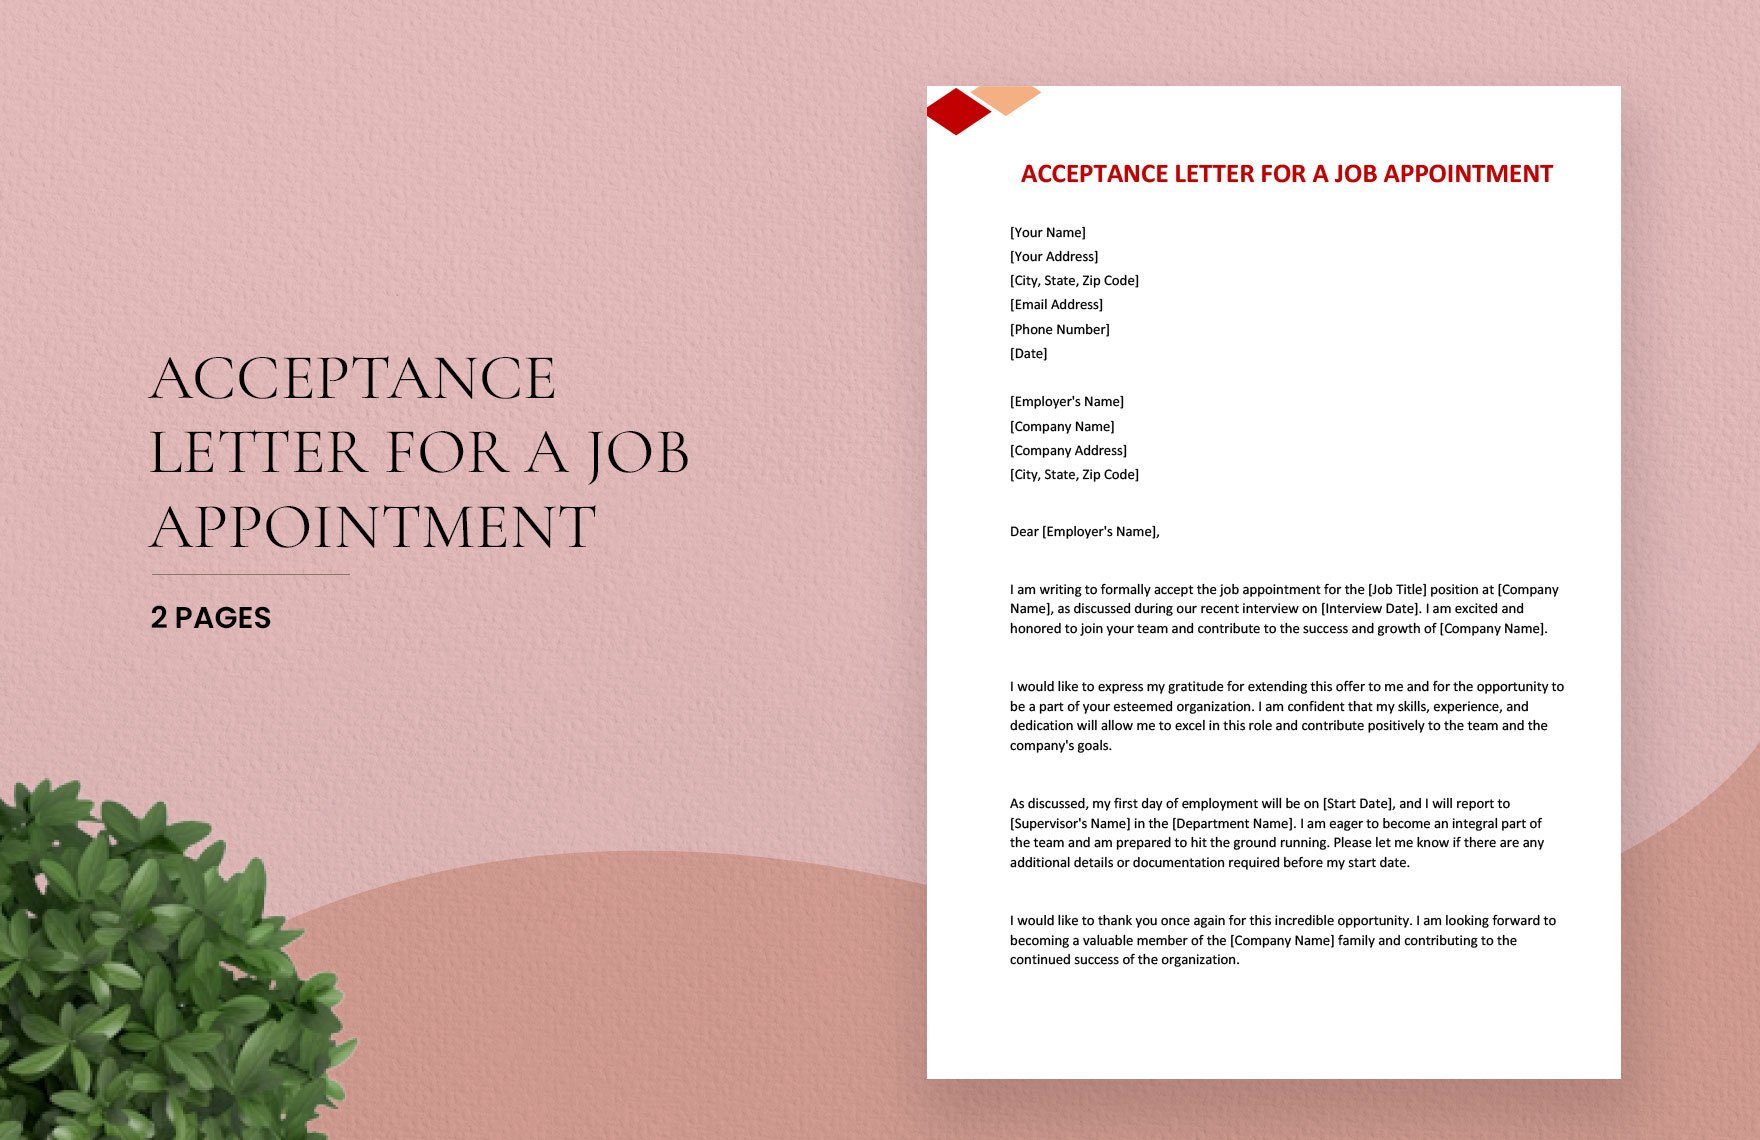 Acceptance Letter For A Job Appointment